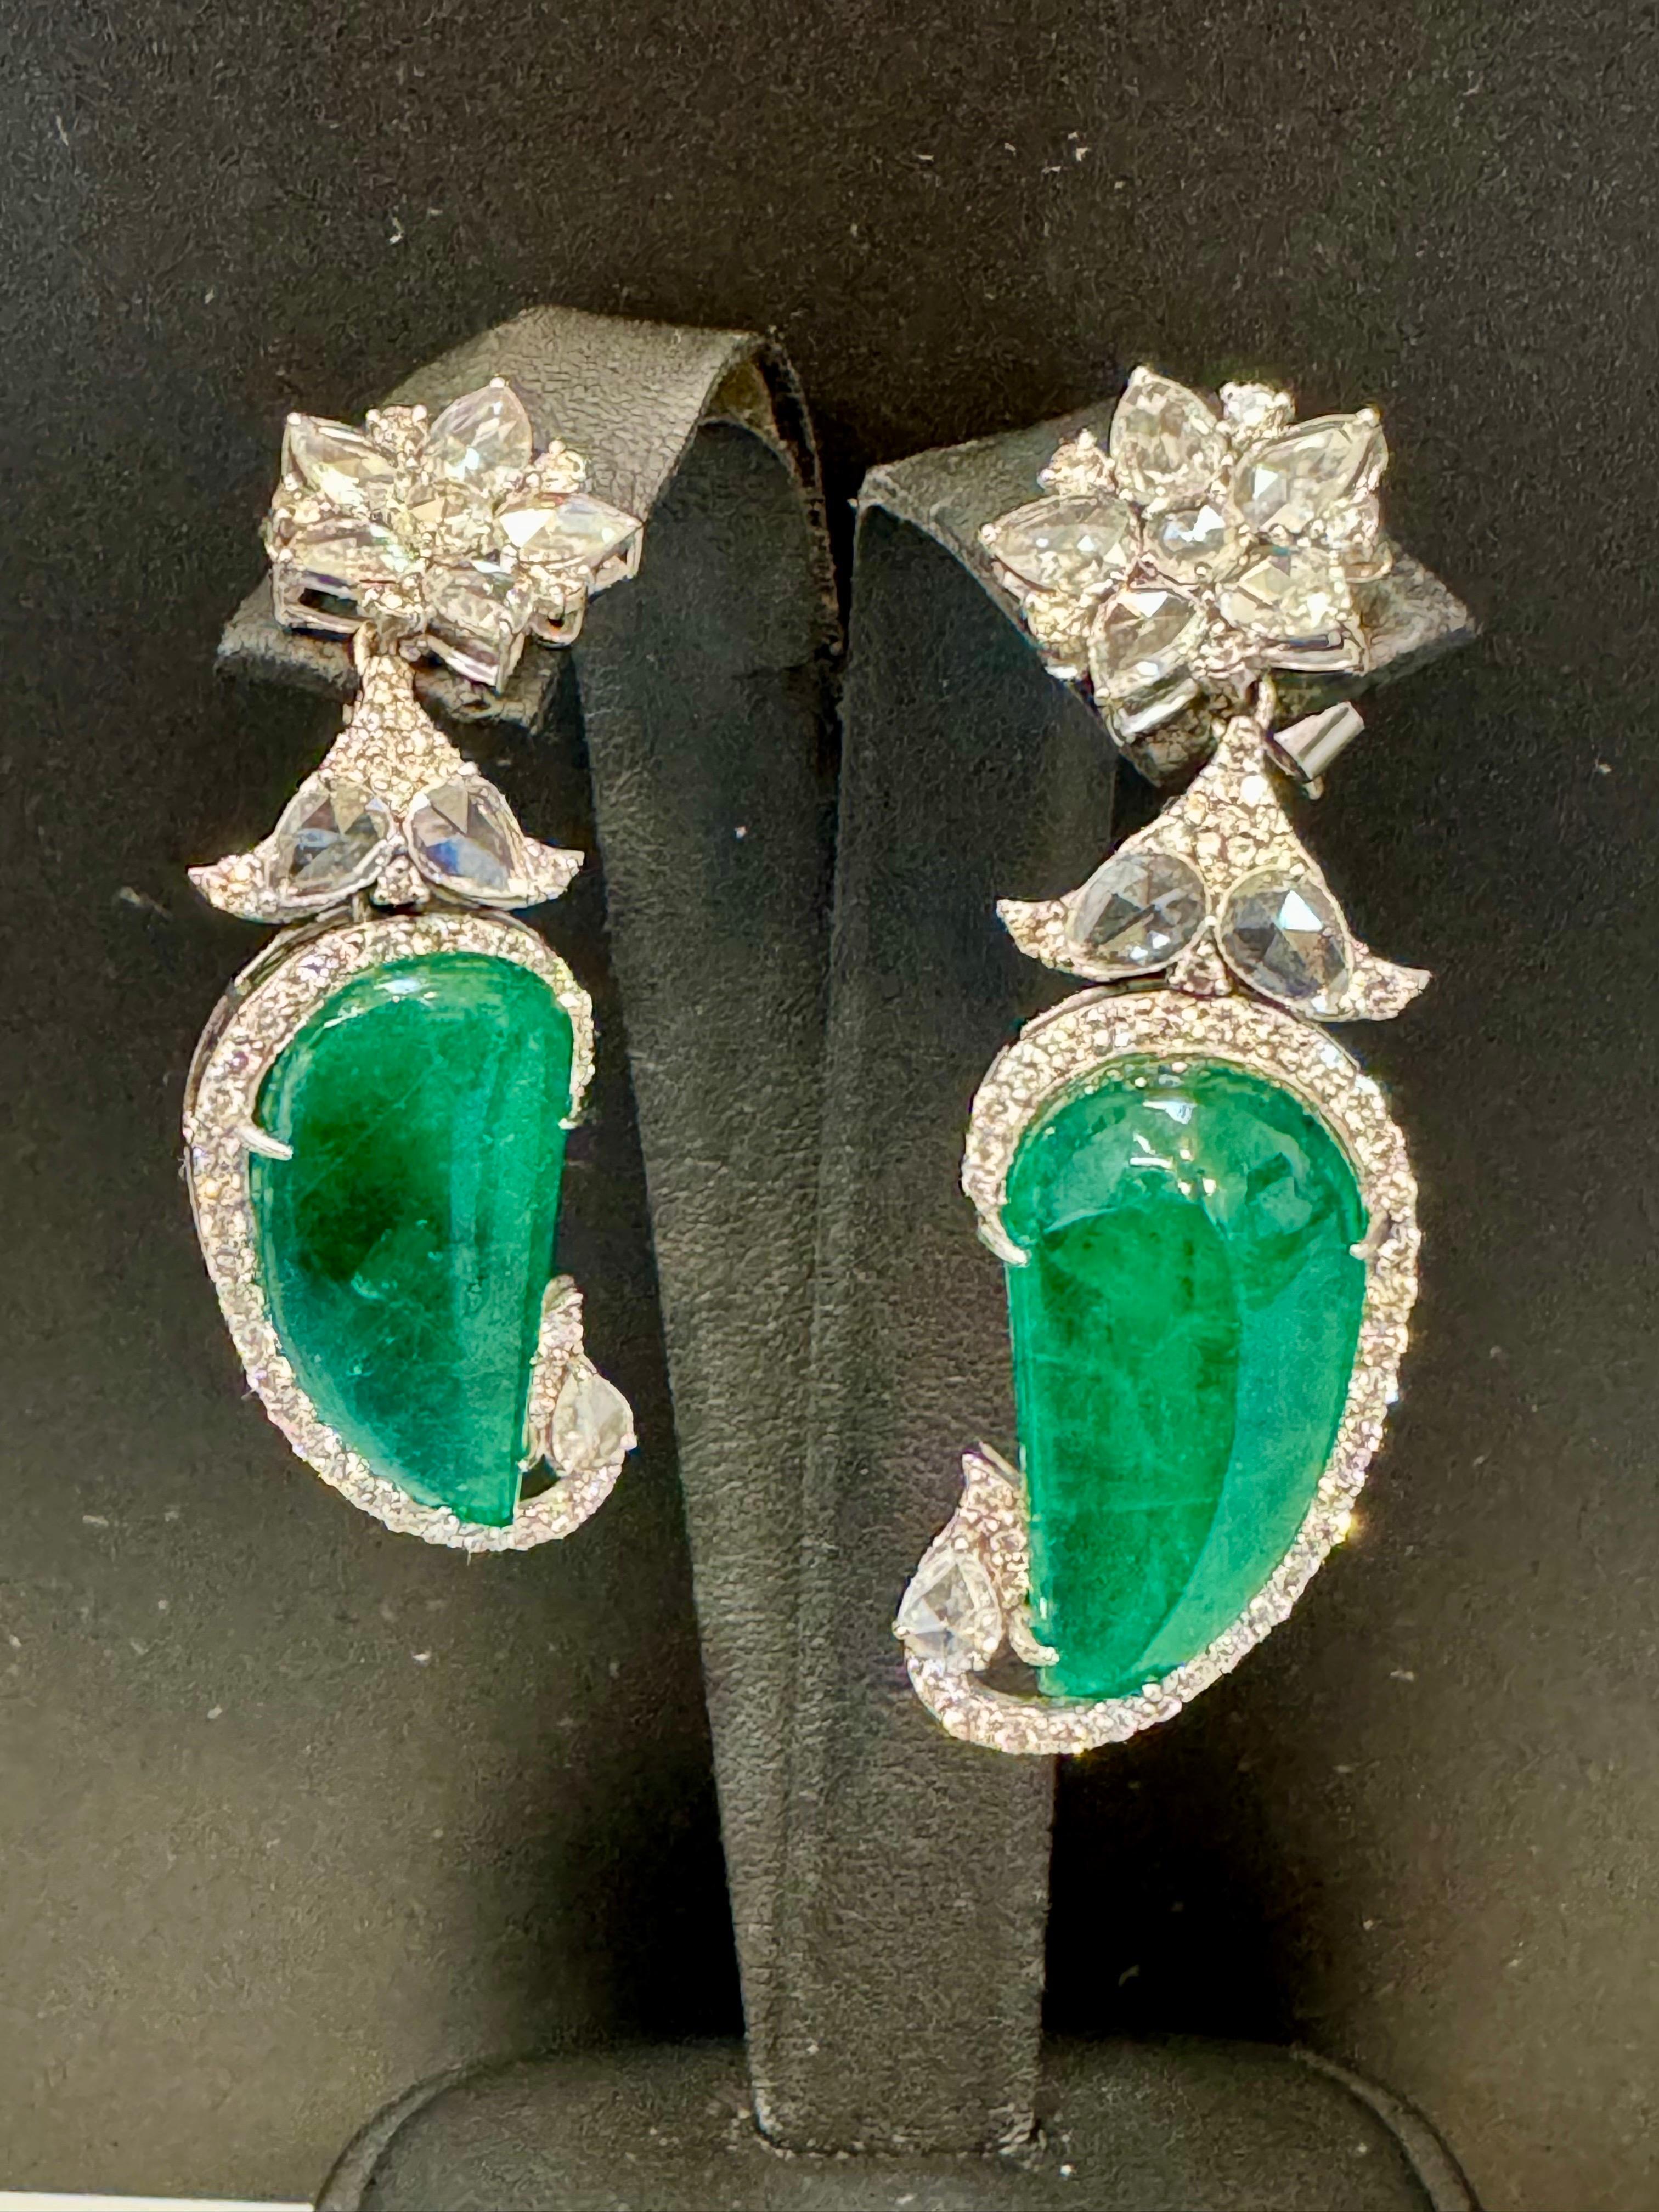 20 Ct Fine Emerald Cabochon & 4 Ct Rose Cut Diamond  18 Kt White Gold  Earrings For Sale 10